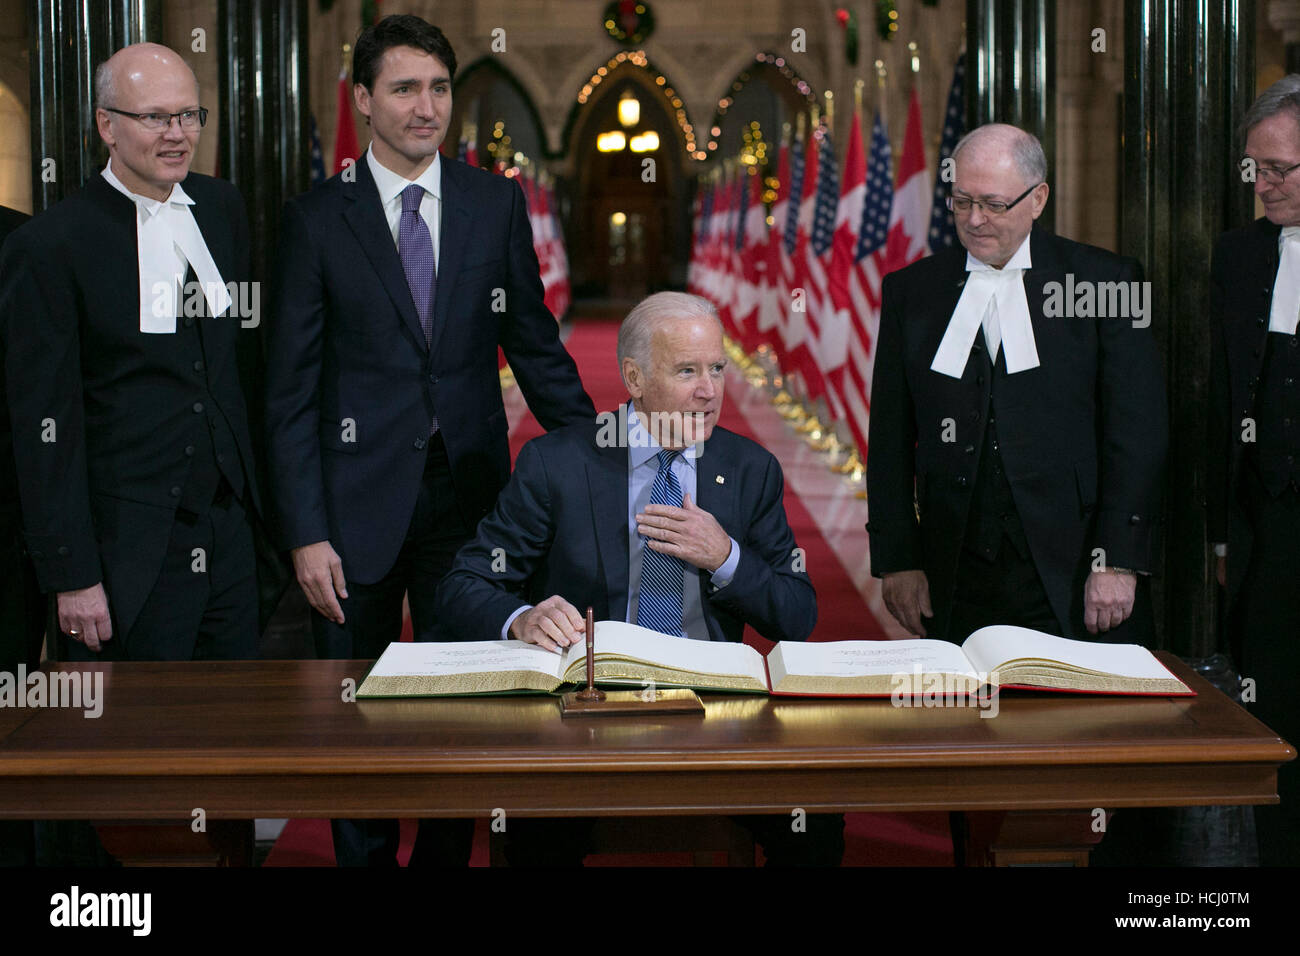 Ottawa, Canada. 9th Dec, 2016. U.S. Vice President Joe Biden (C) signs the official guestbook, joined by Canadian Prime Minister Justin Trudeau (2nd L), in Ottawa, Canada, on Dec. 9, 2016. Credit:  David Kawai/Xinhua/Alamy Live News Stock Photo